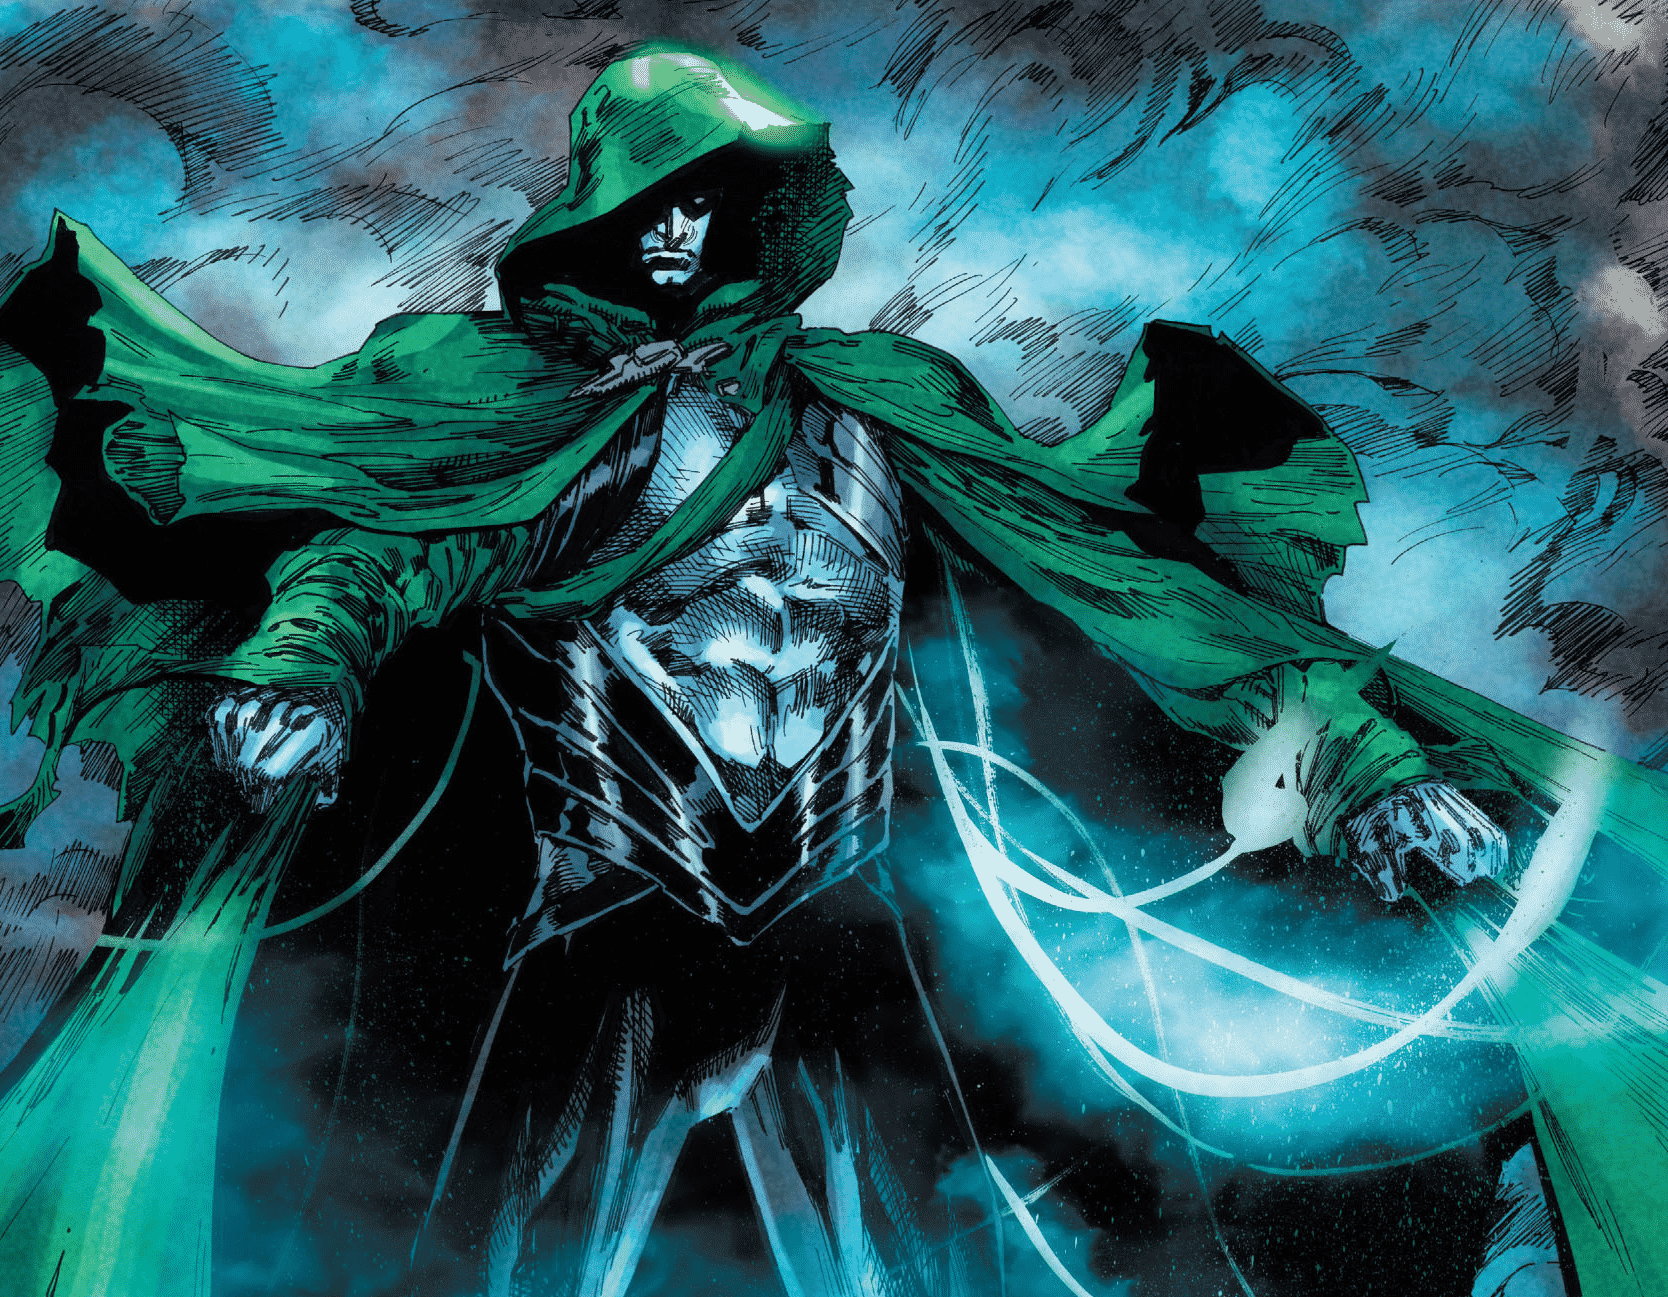 Jim Corrigan is going to hand over The Spectre mantle to the Green Arrow, Oliver Queen. Pic courtesy: ign.com